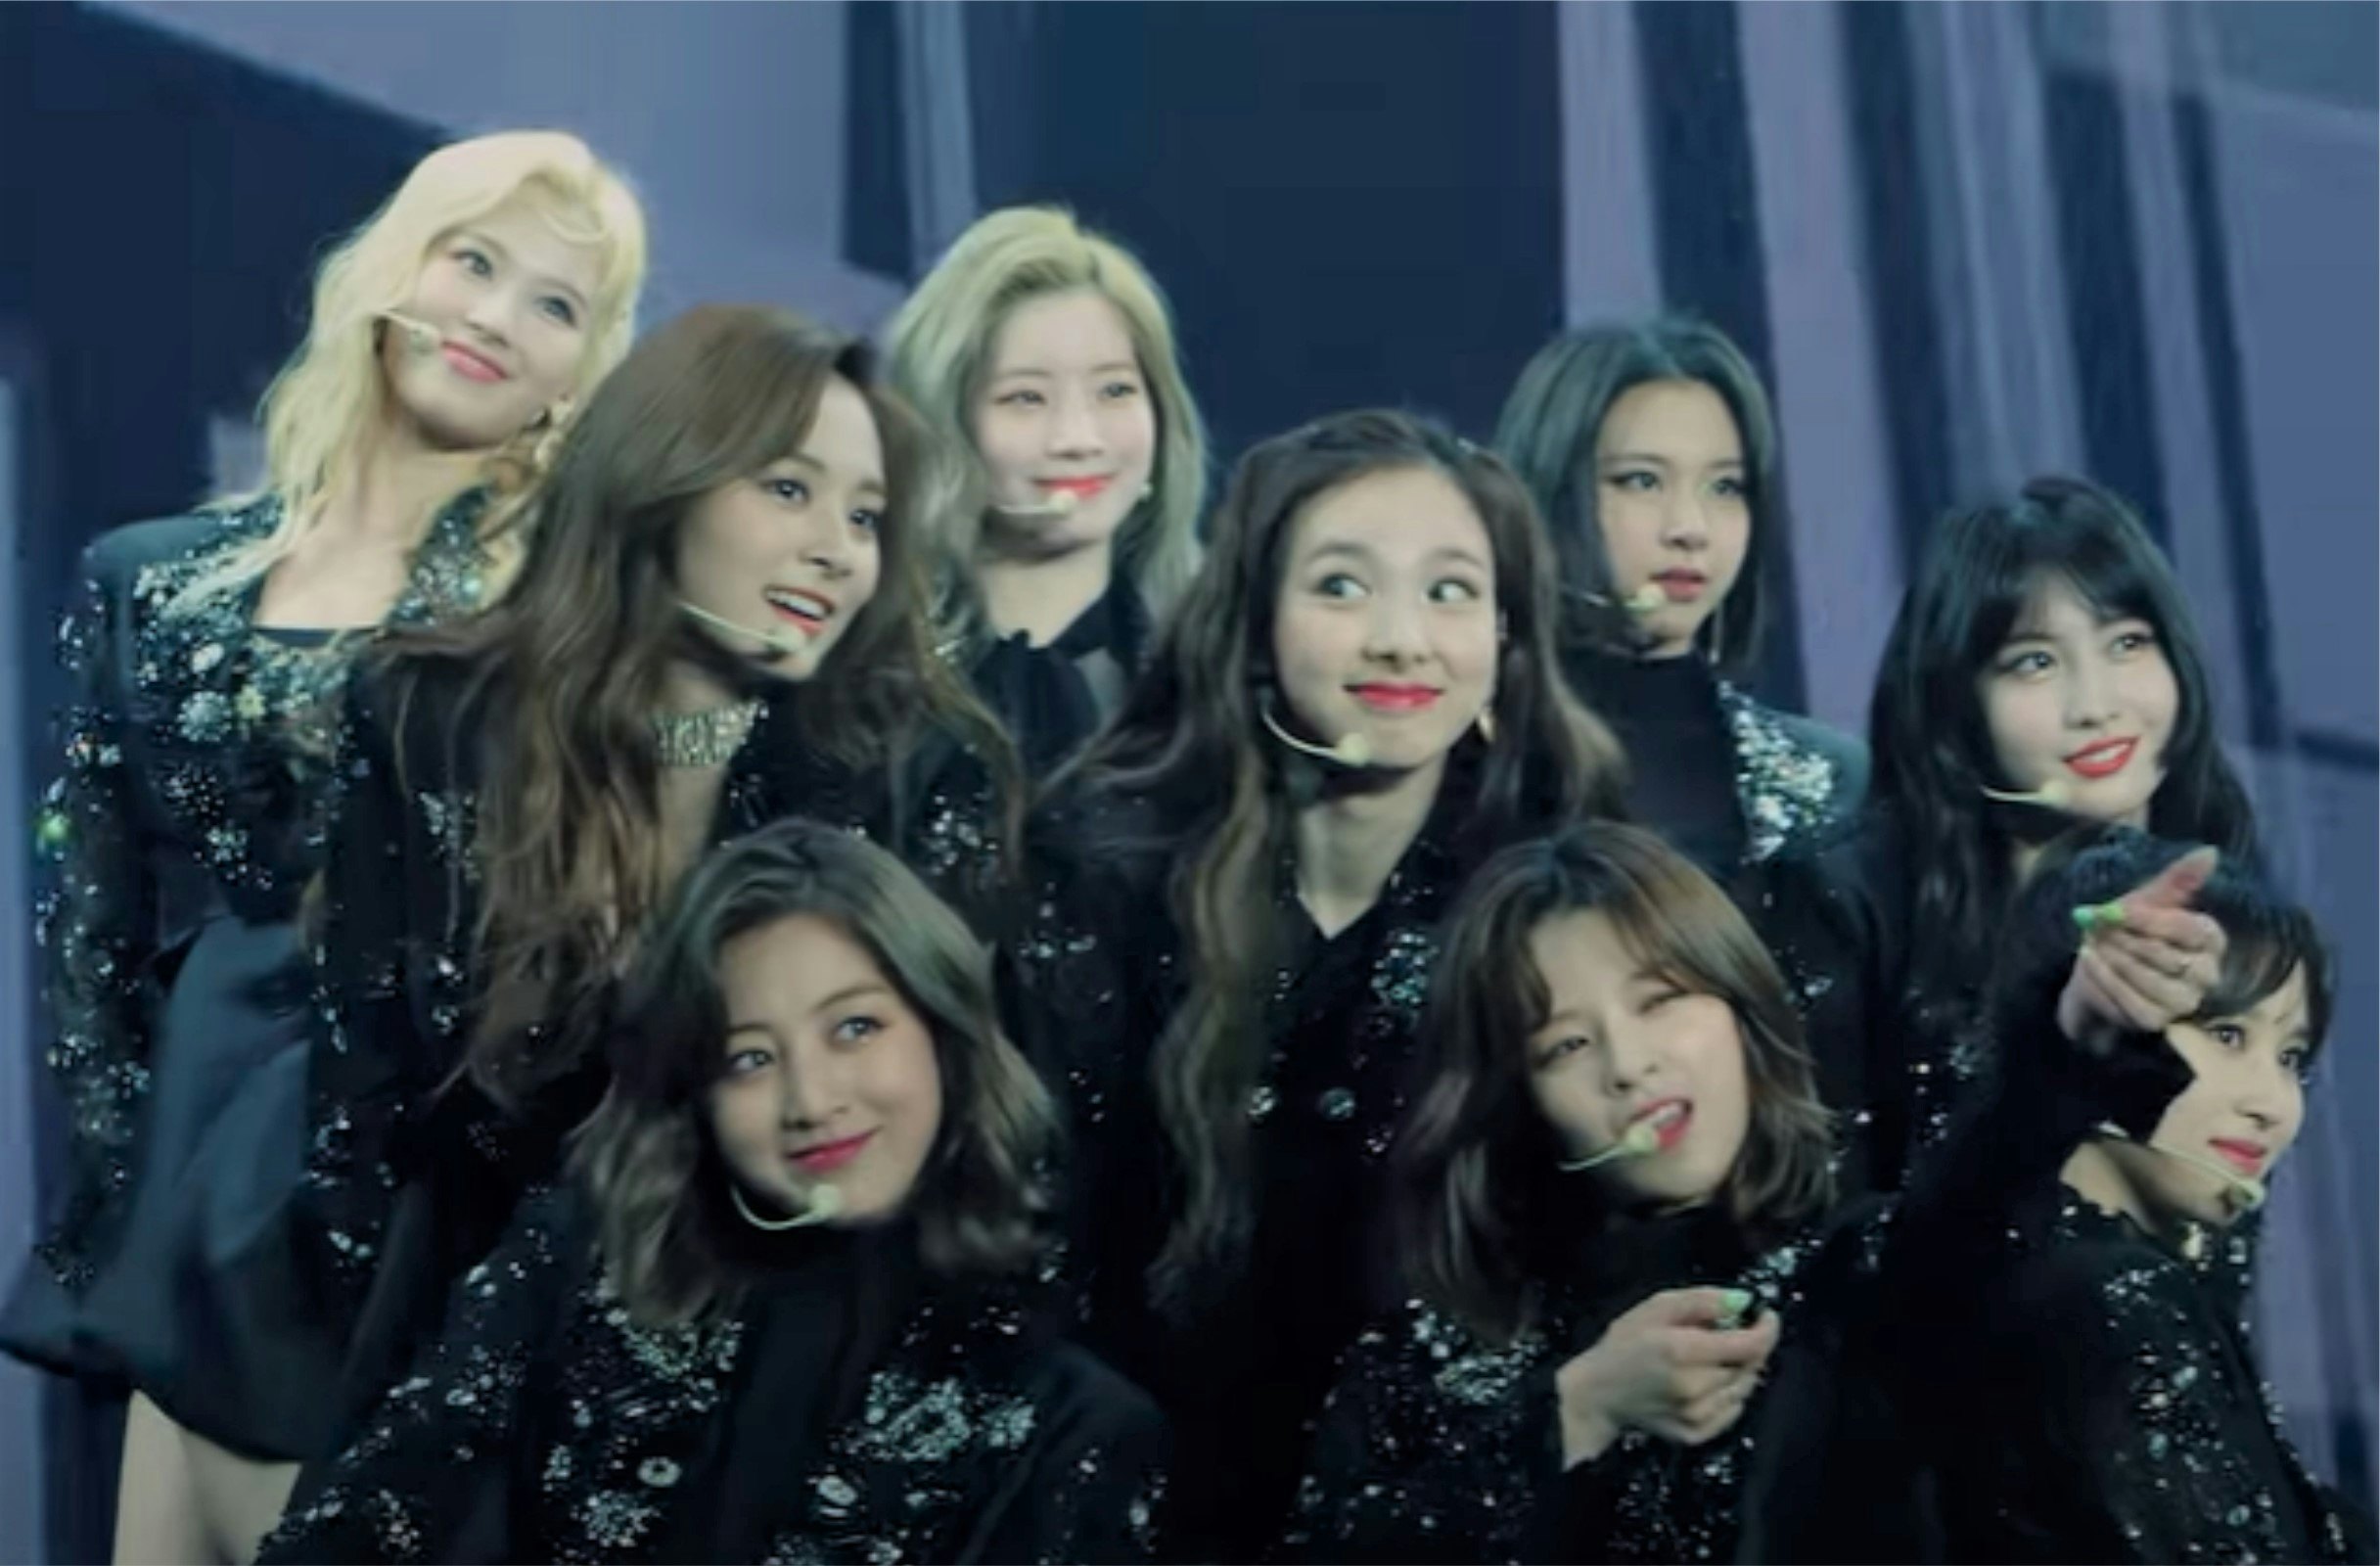 Twice S Quotes About Filming Seize The Light Will Make You So